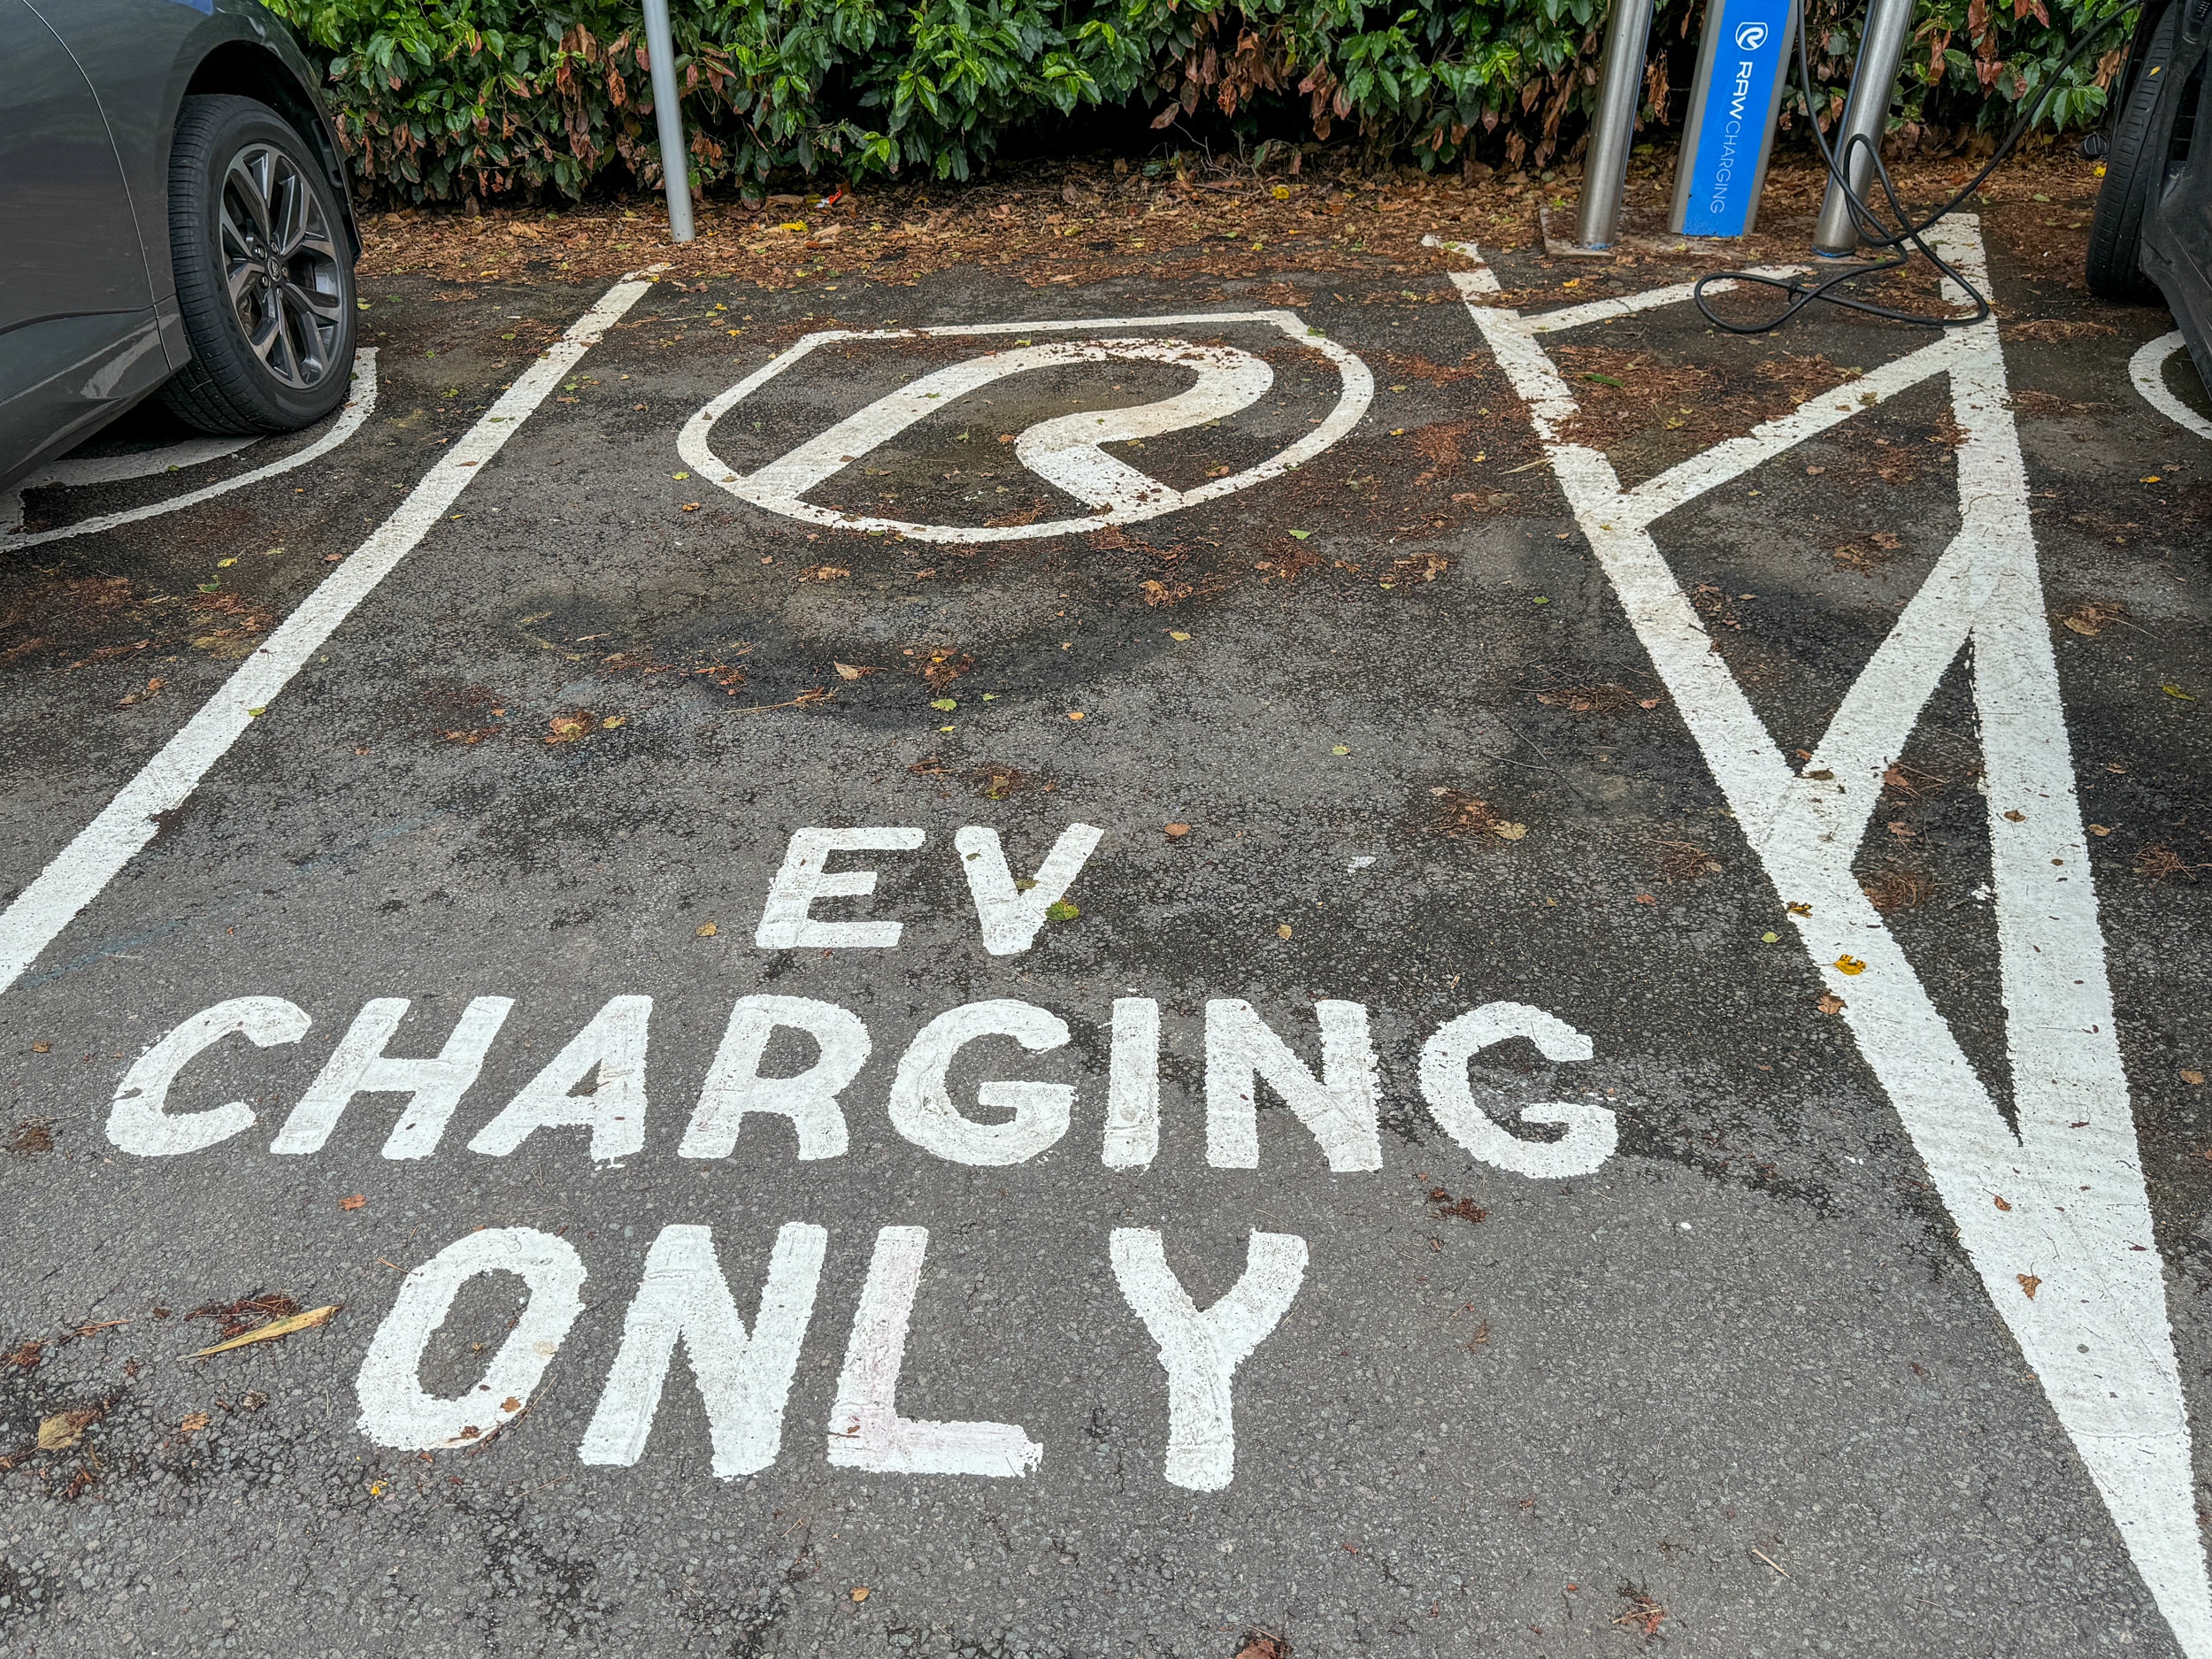 Alton Towers Electric Car Chargers Installed